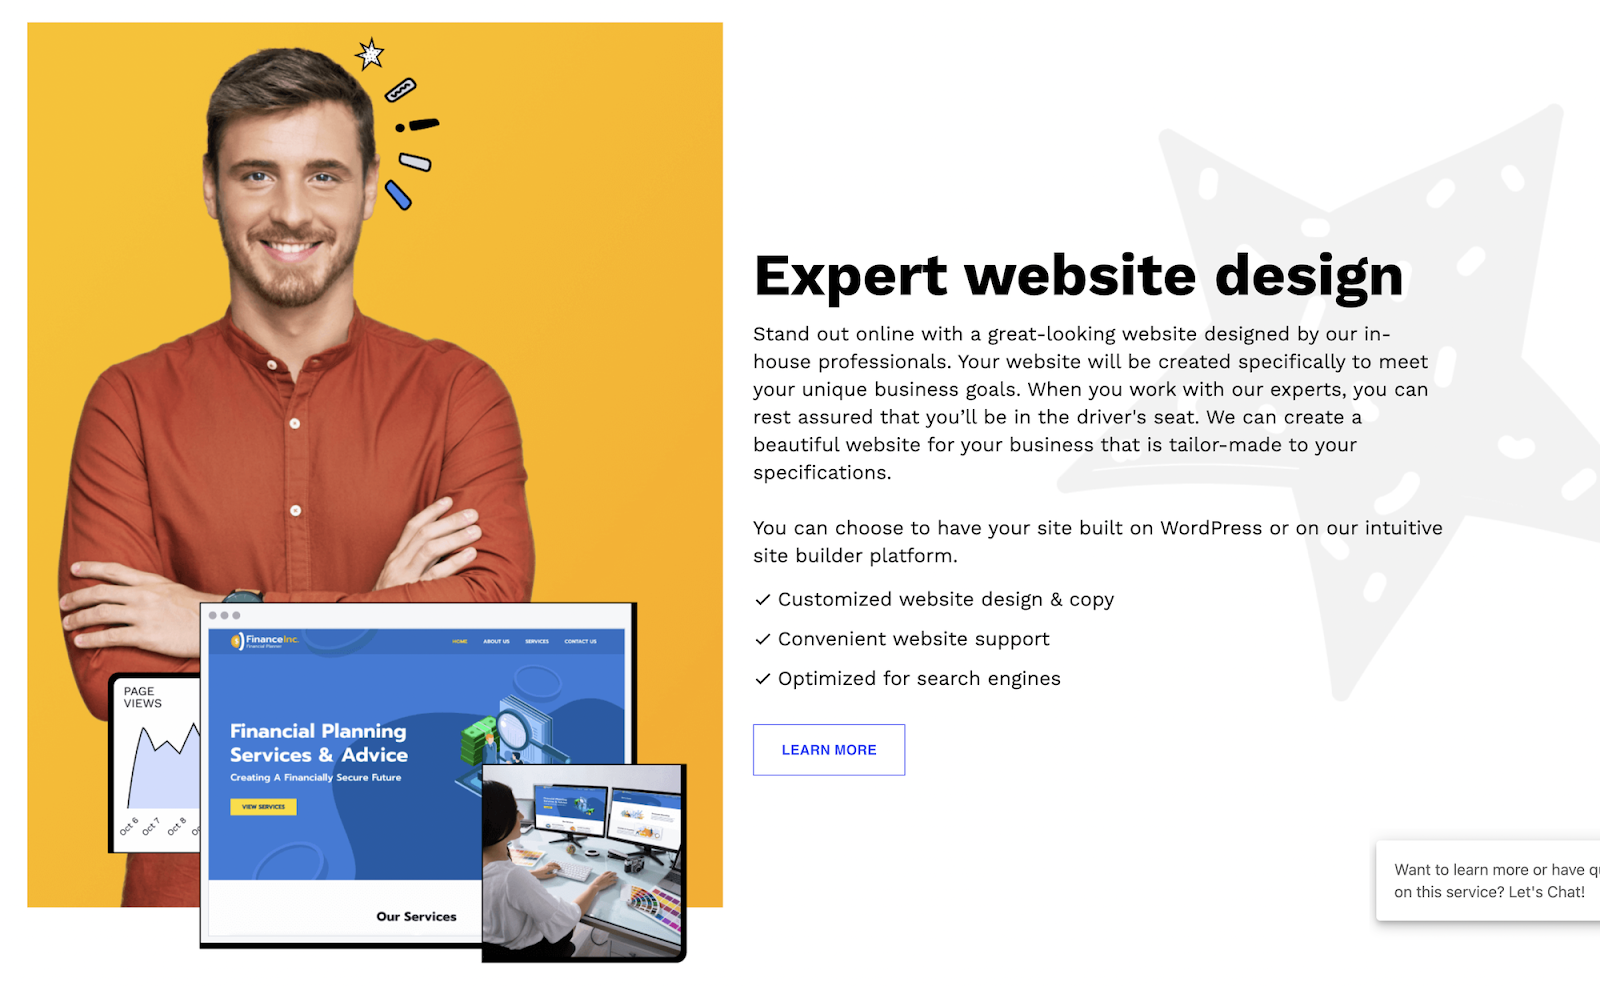 A screenshot from websitebuilder.com showing promotional material for their design experts.